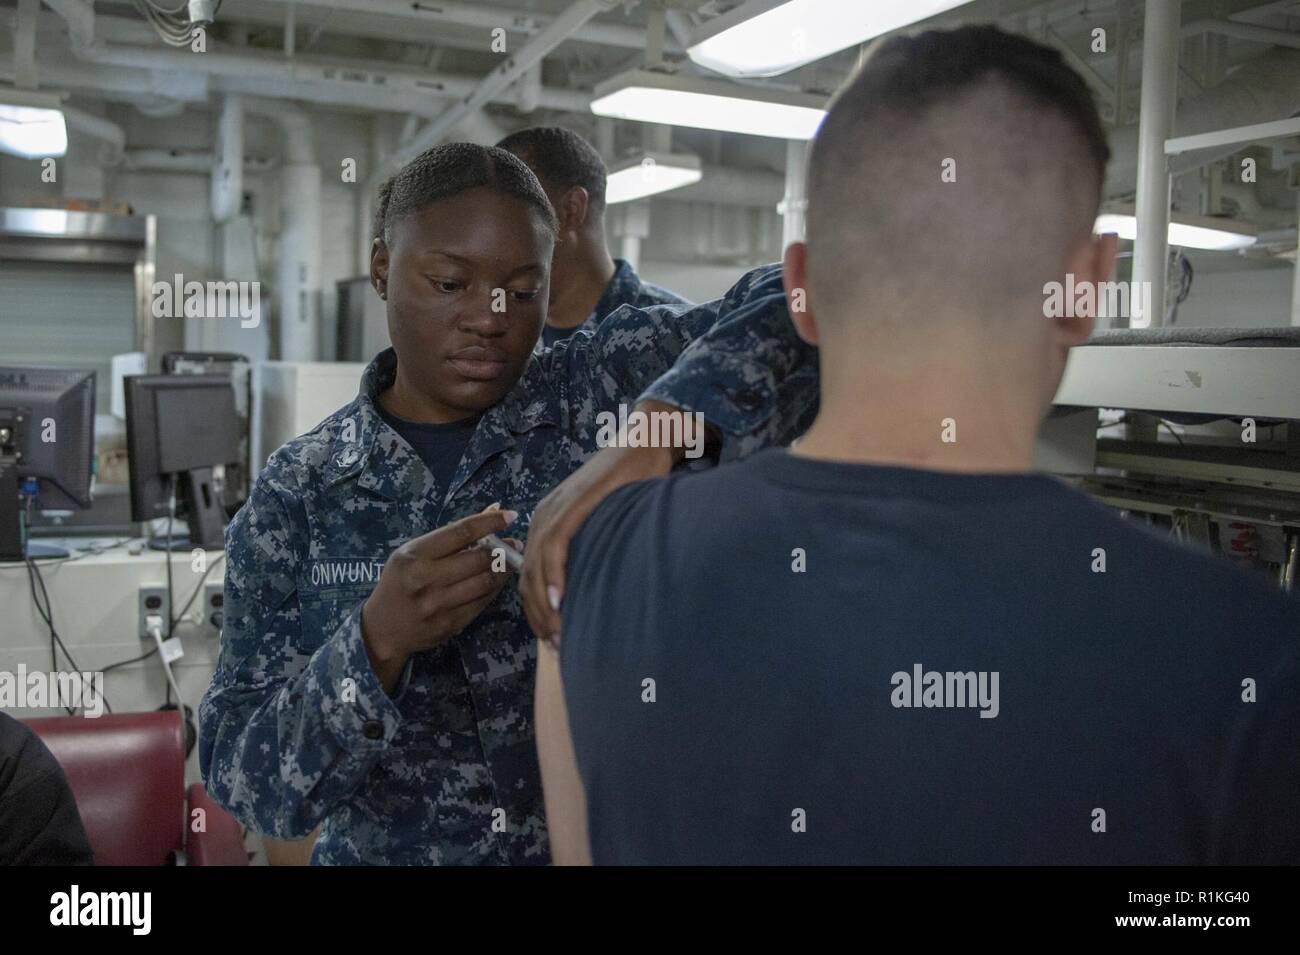 SAN DIEGO (Oct. 16, 2018) Hospital Corpsman 3rd Class Mercy Onwunta, from Bronx, N.Y., administers an influenza virus vaccine to Aviation Electronics Technician Airman Nicholas Myers, from Greenville, Ohio, in the medical ward aboard the amphibious assault ship USS Bonhomme Richard (LHD 6). Bonhomme Richard is in its homeport of San Diego. Stock Photo